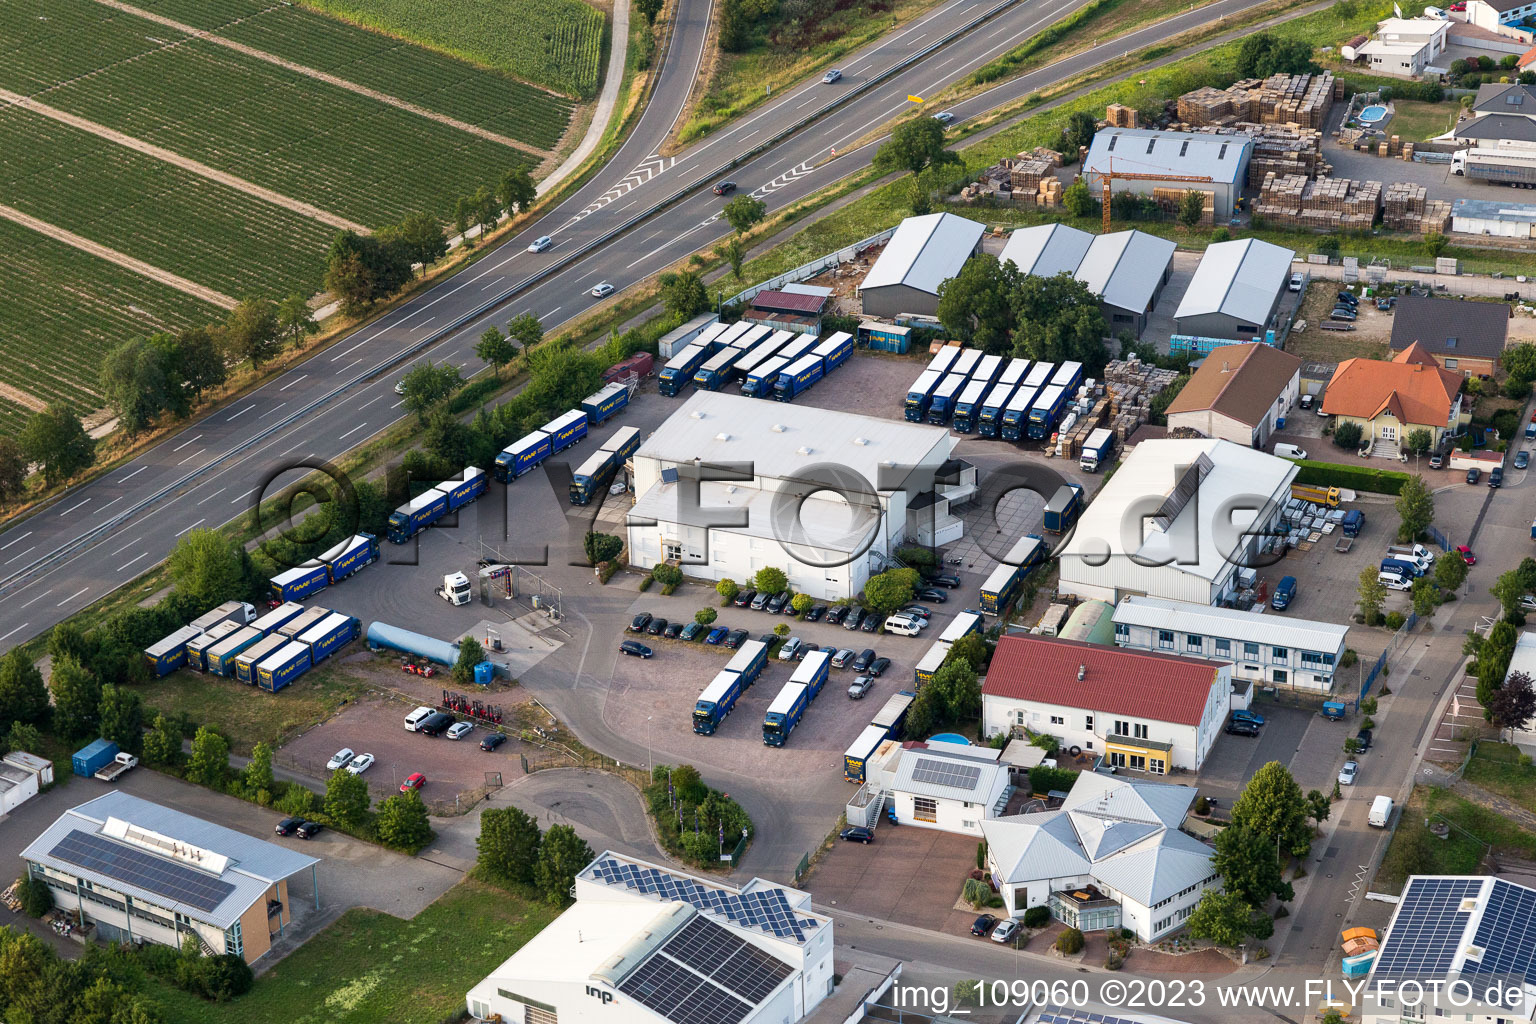 Oblique view of Werkstrasse industrial area in the district Berghausen in Römerberg in the state Rhineland-Palatinate, Germany